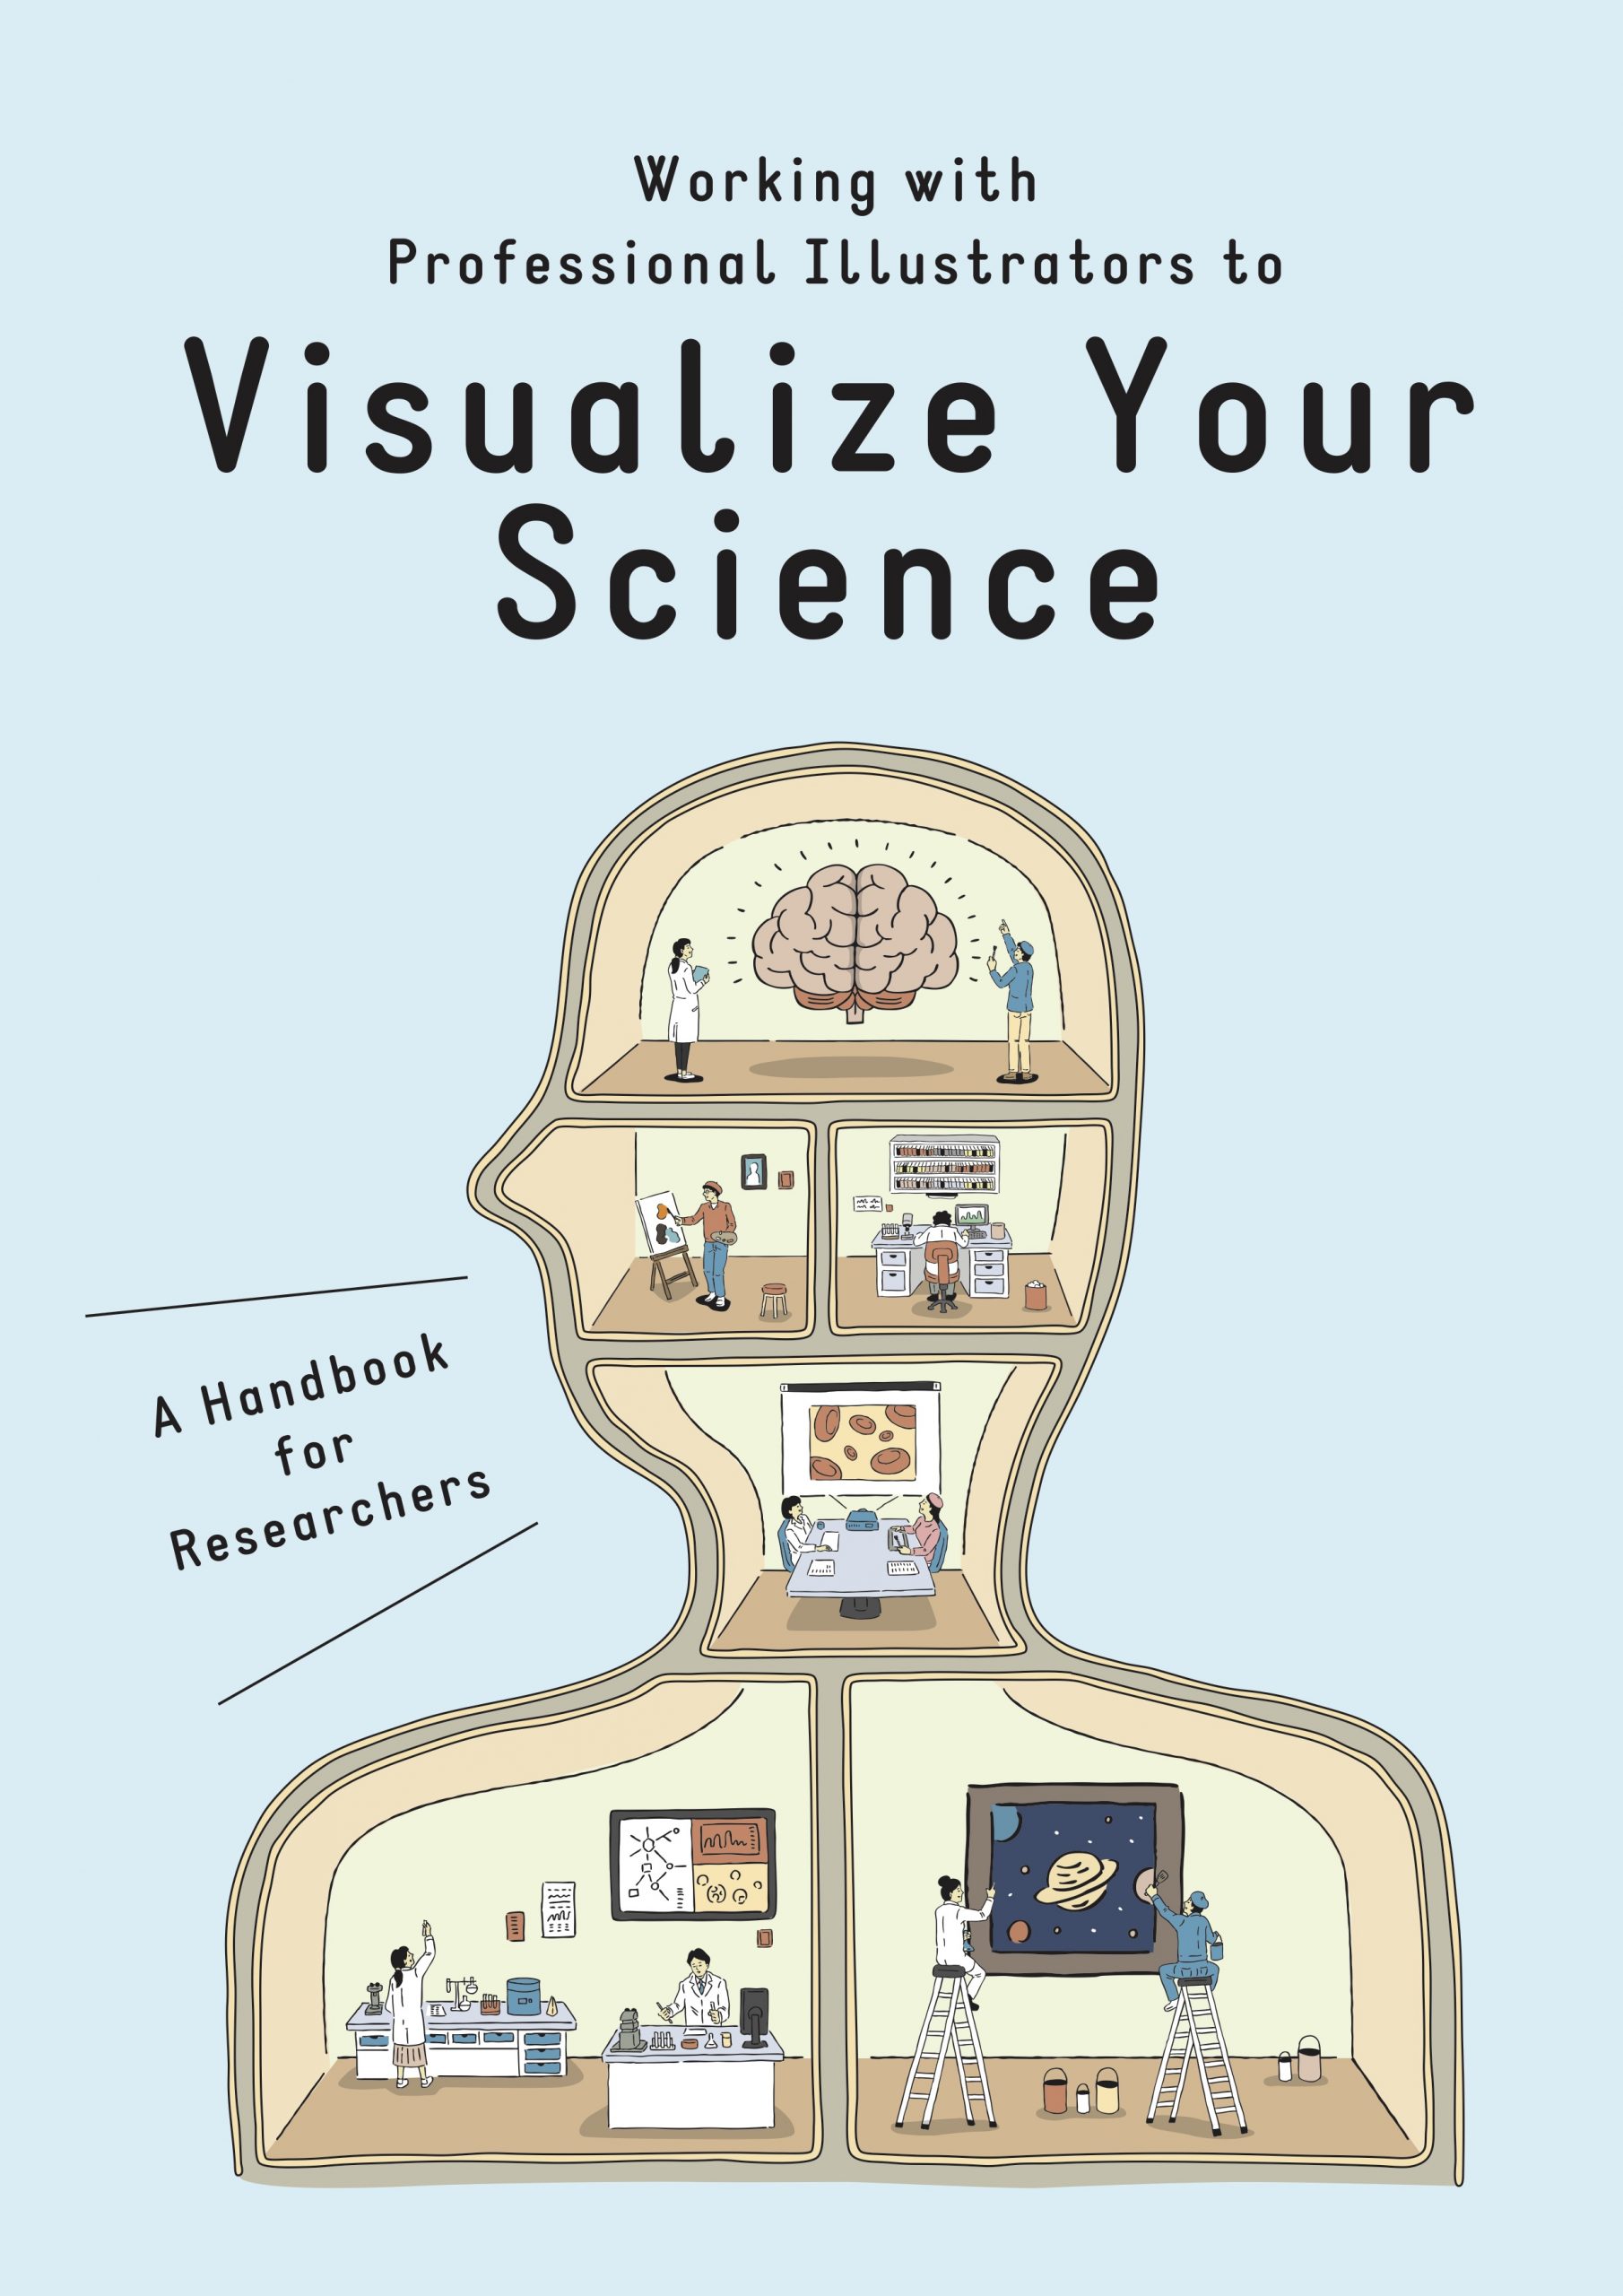 Booklet “Working with Professional Illustrators to Visualize Your Science”